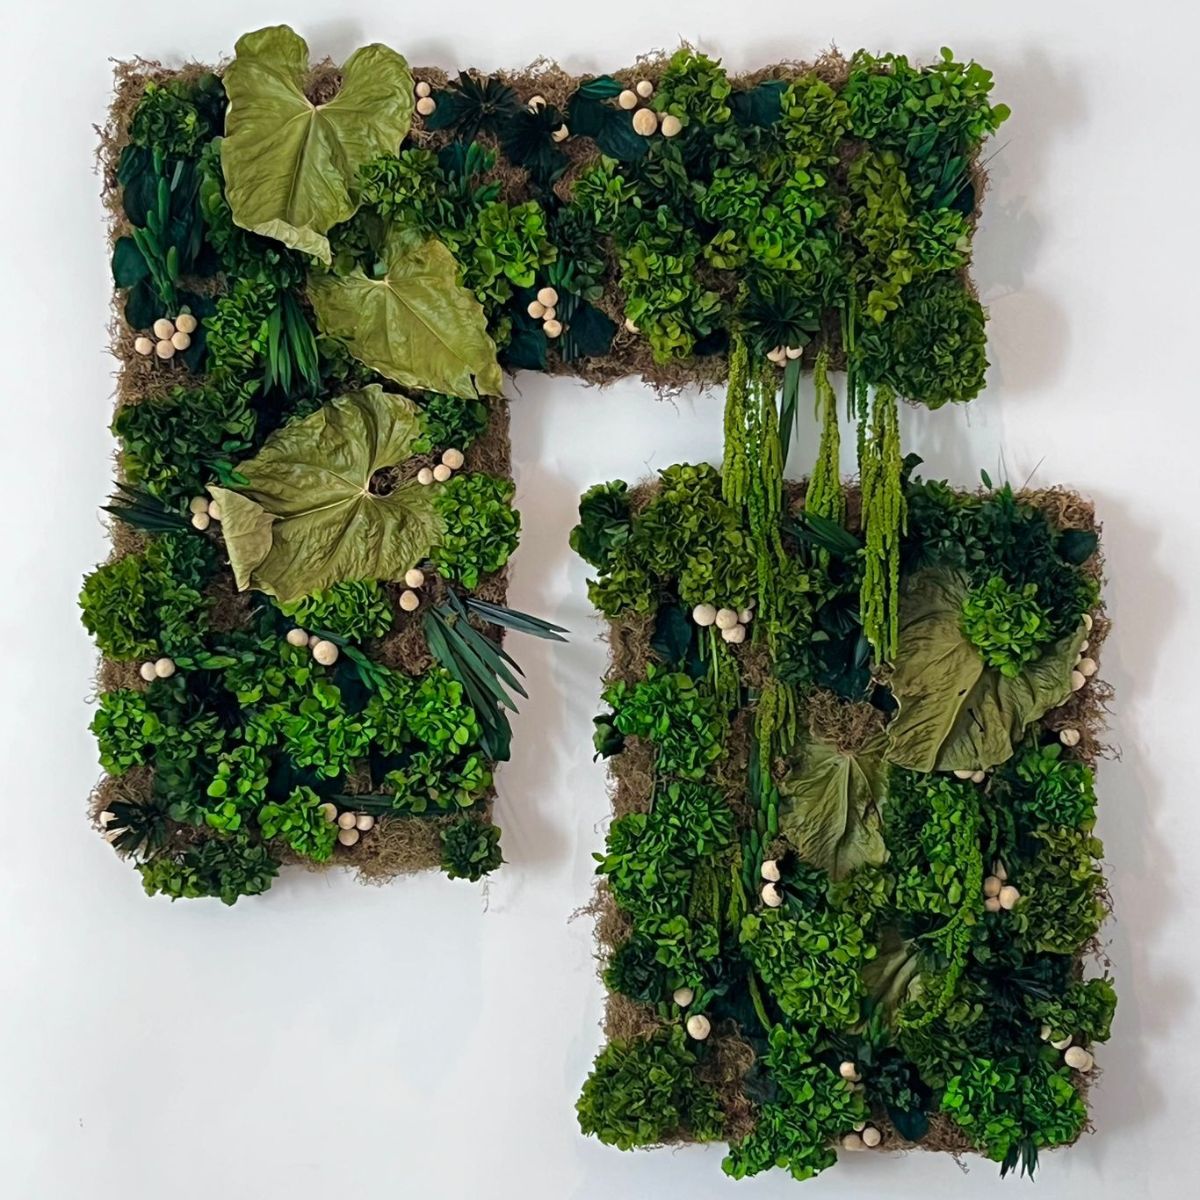 Green wall design by Flowers Naturally